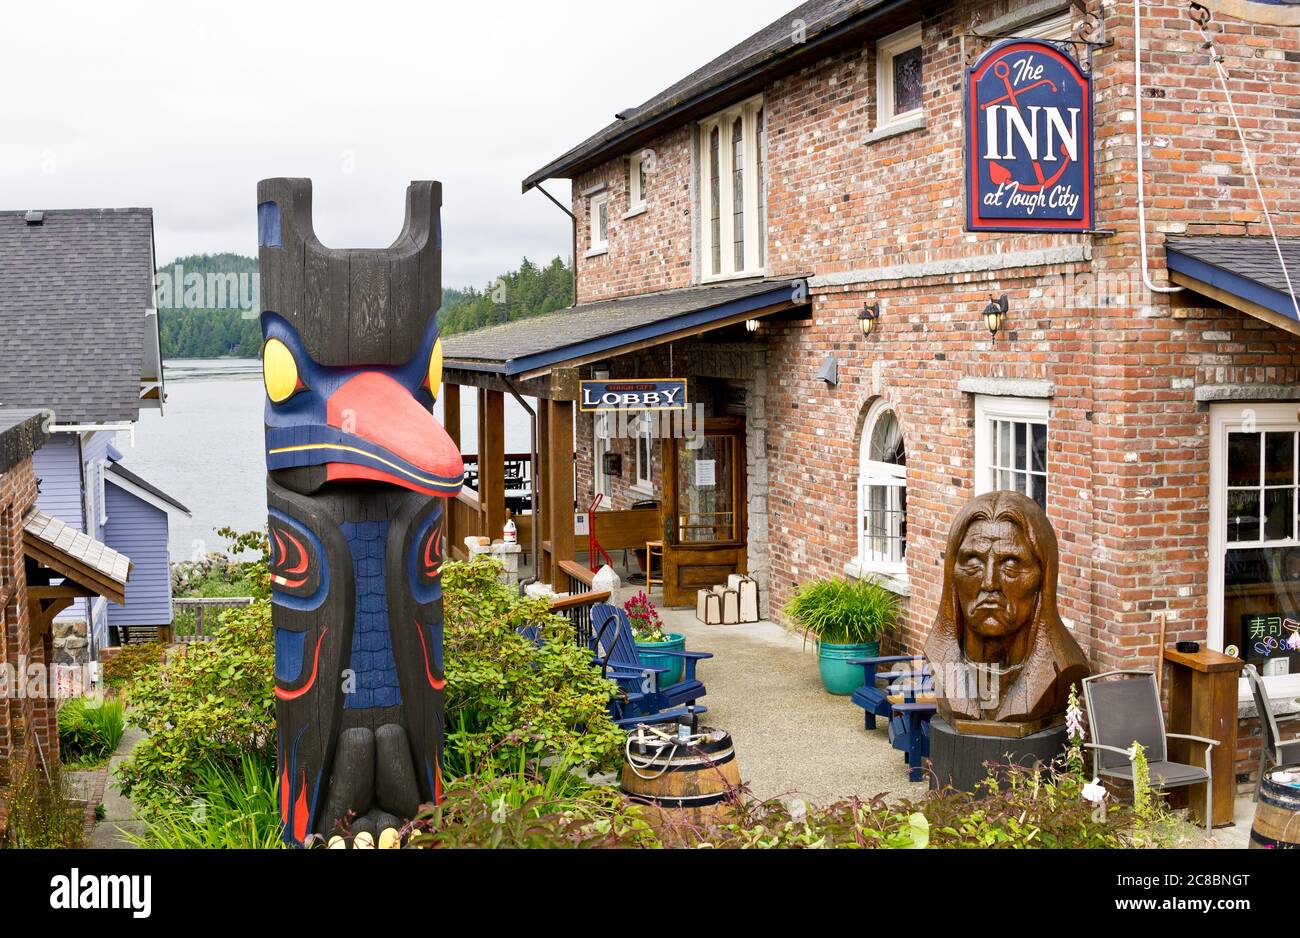 Exterior of the Inn at Tough City in the town of Tofino, British Columbia, Canada.  Totem pole and Indigenous carvings outside the hotel. Stock Photo